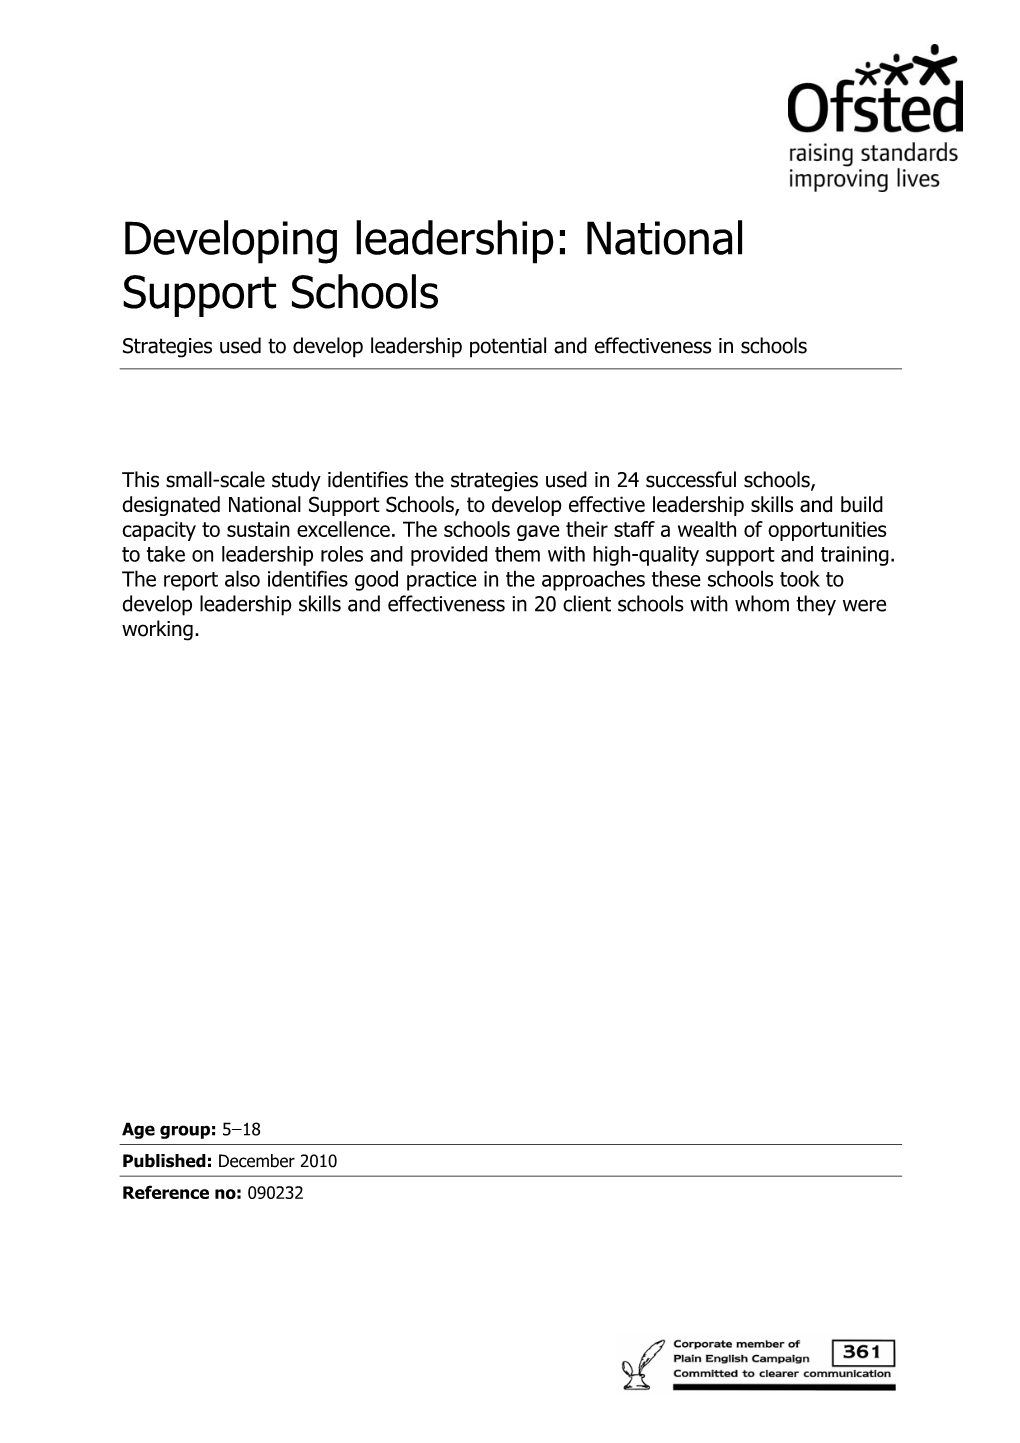 Developing Leadership: National Support Schools Strategies Used to Develop Leadership Potential and Effectiveness in Schools